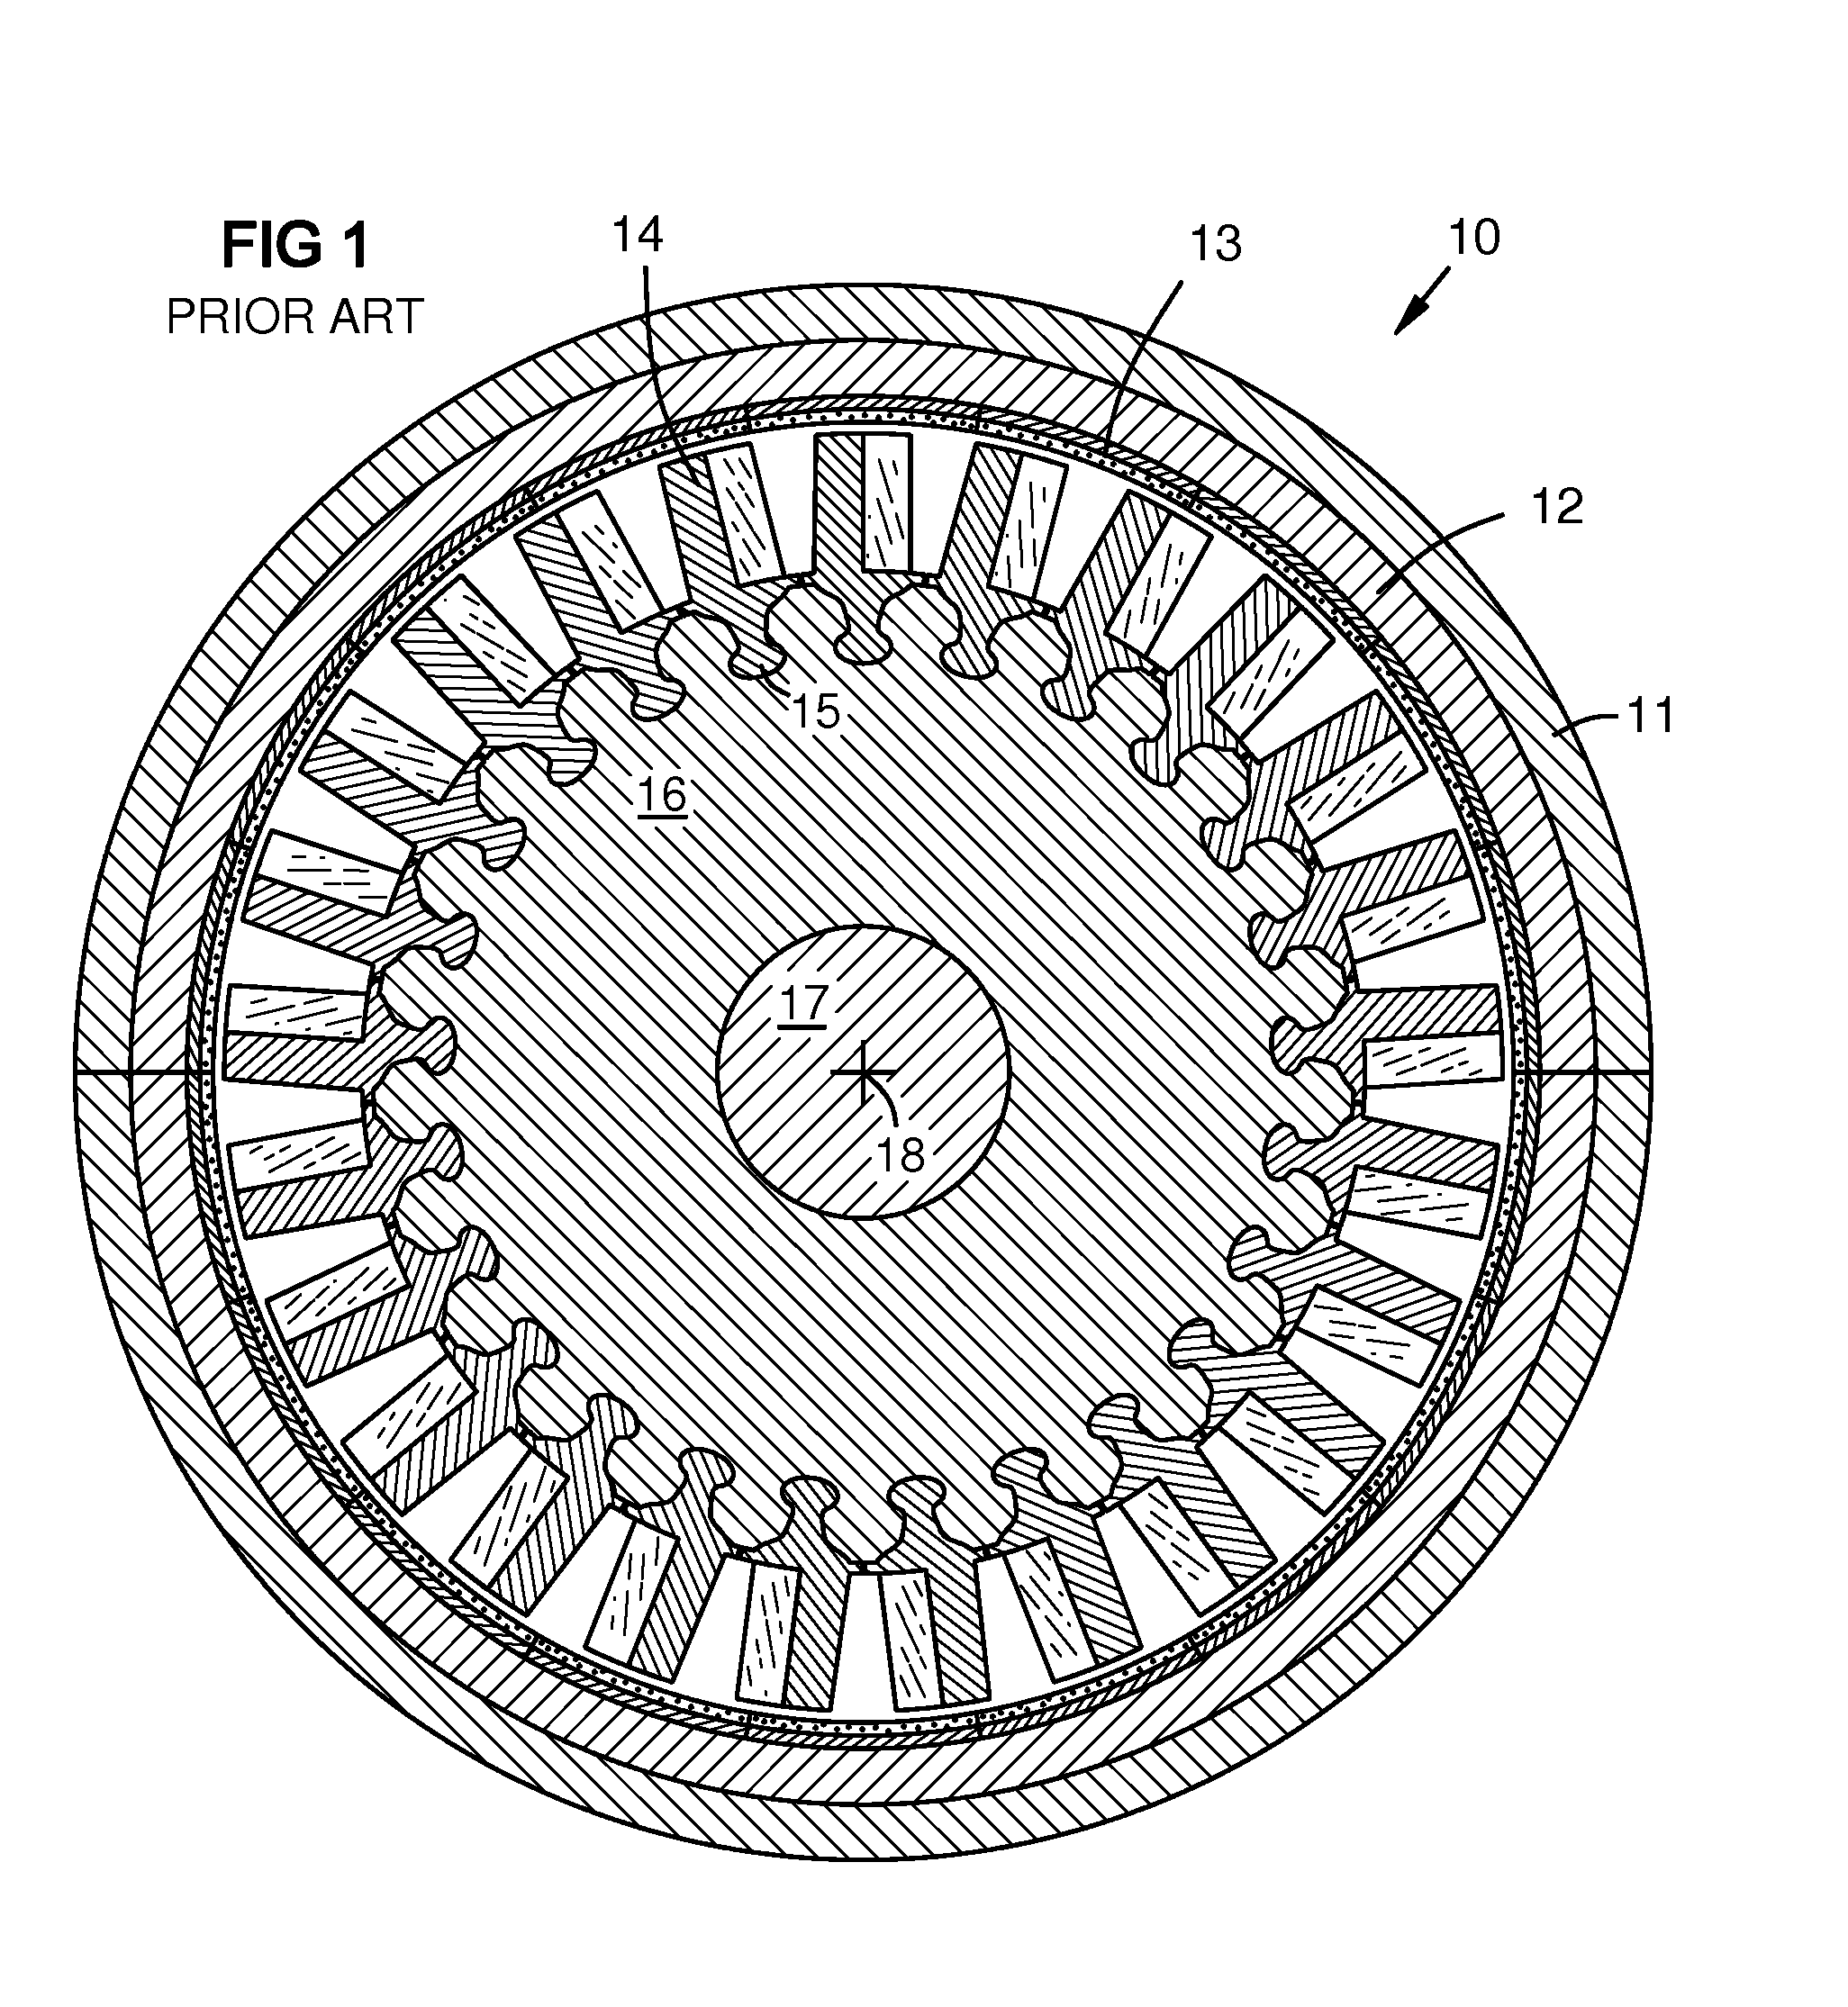 Modular turbine airfoil and platform assembly with independent root teeth